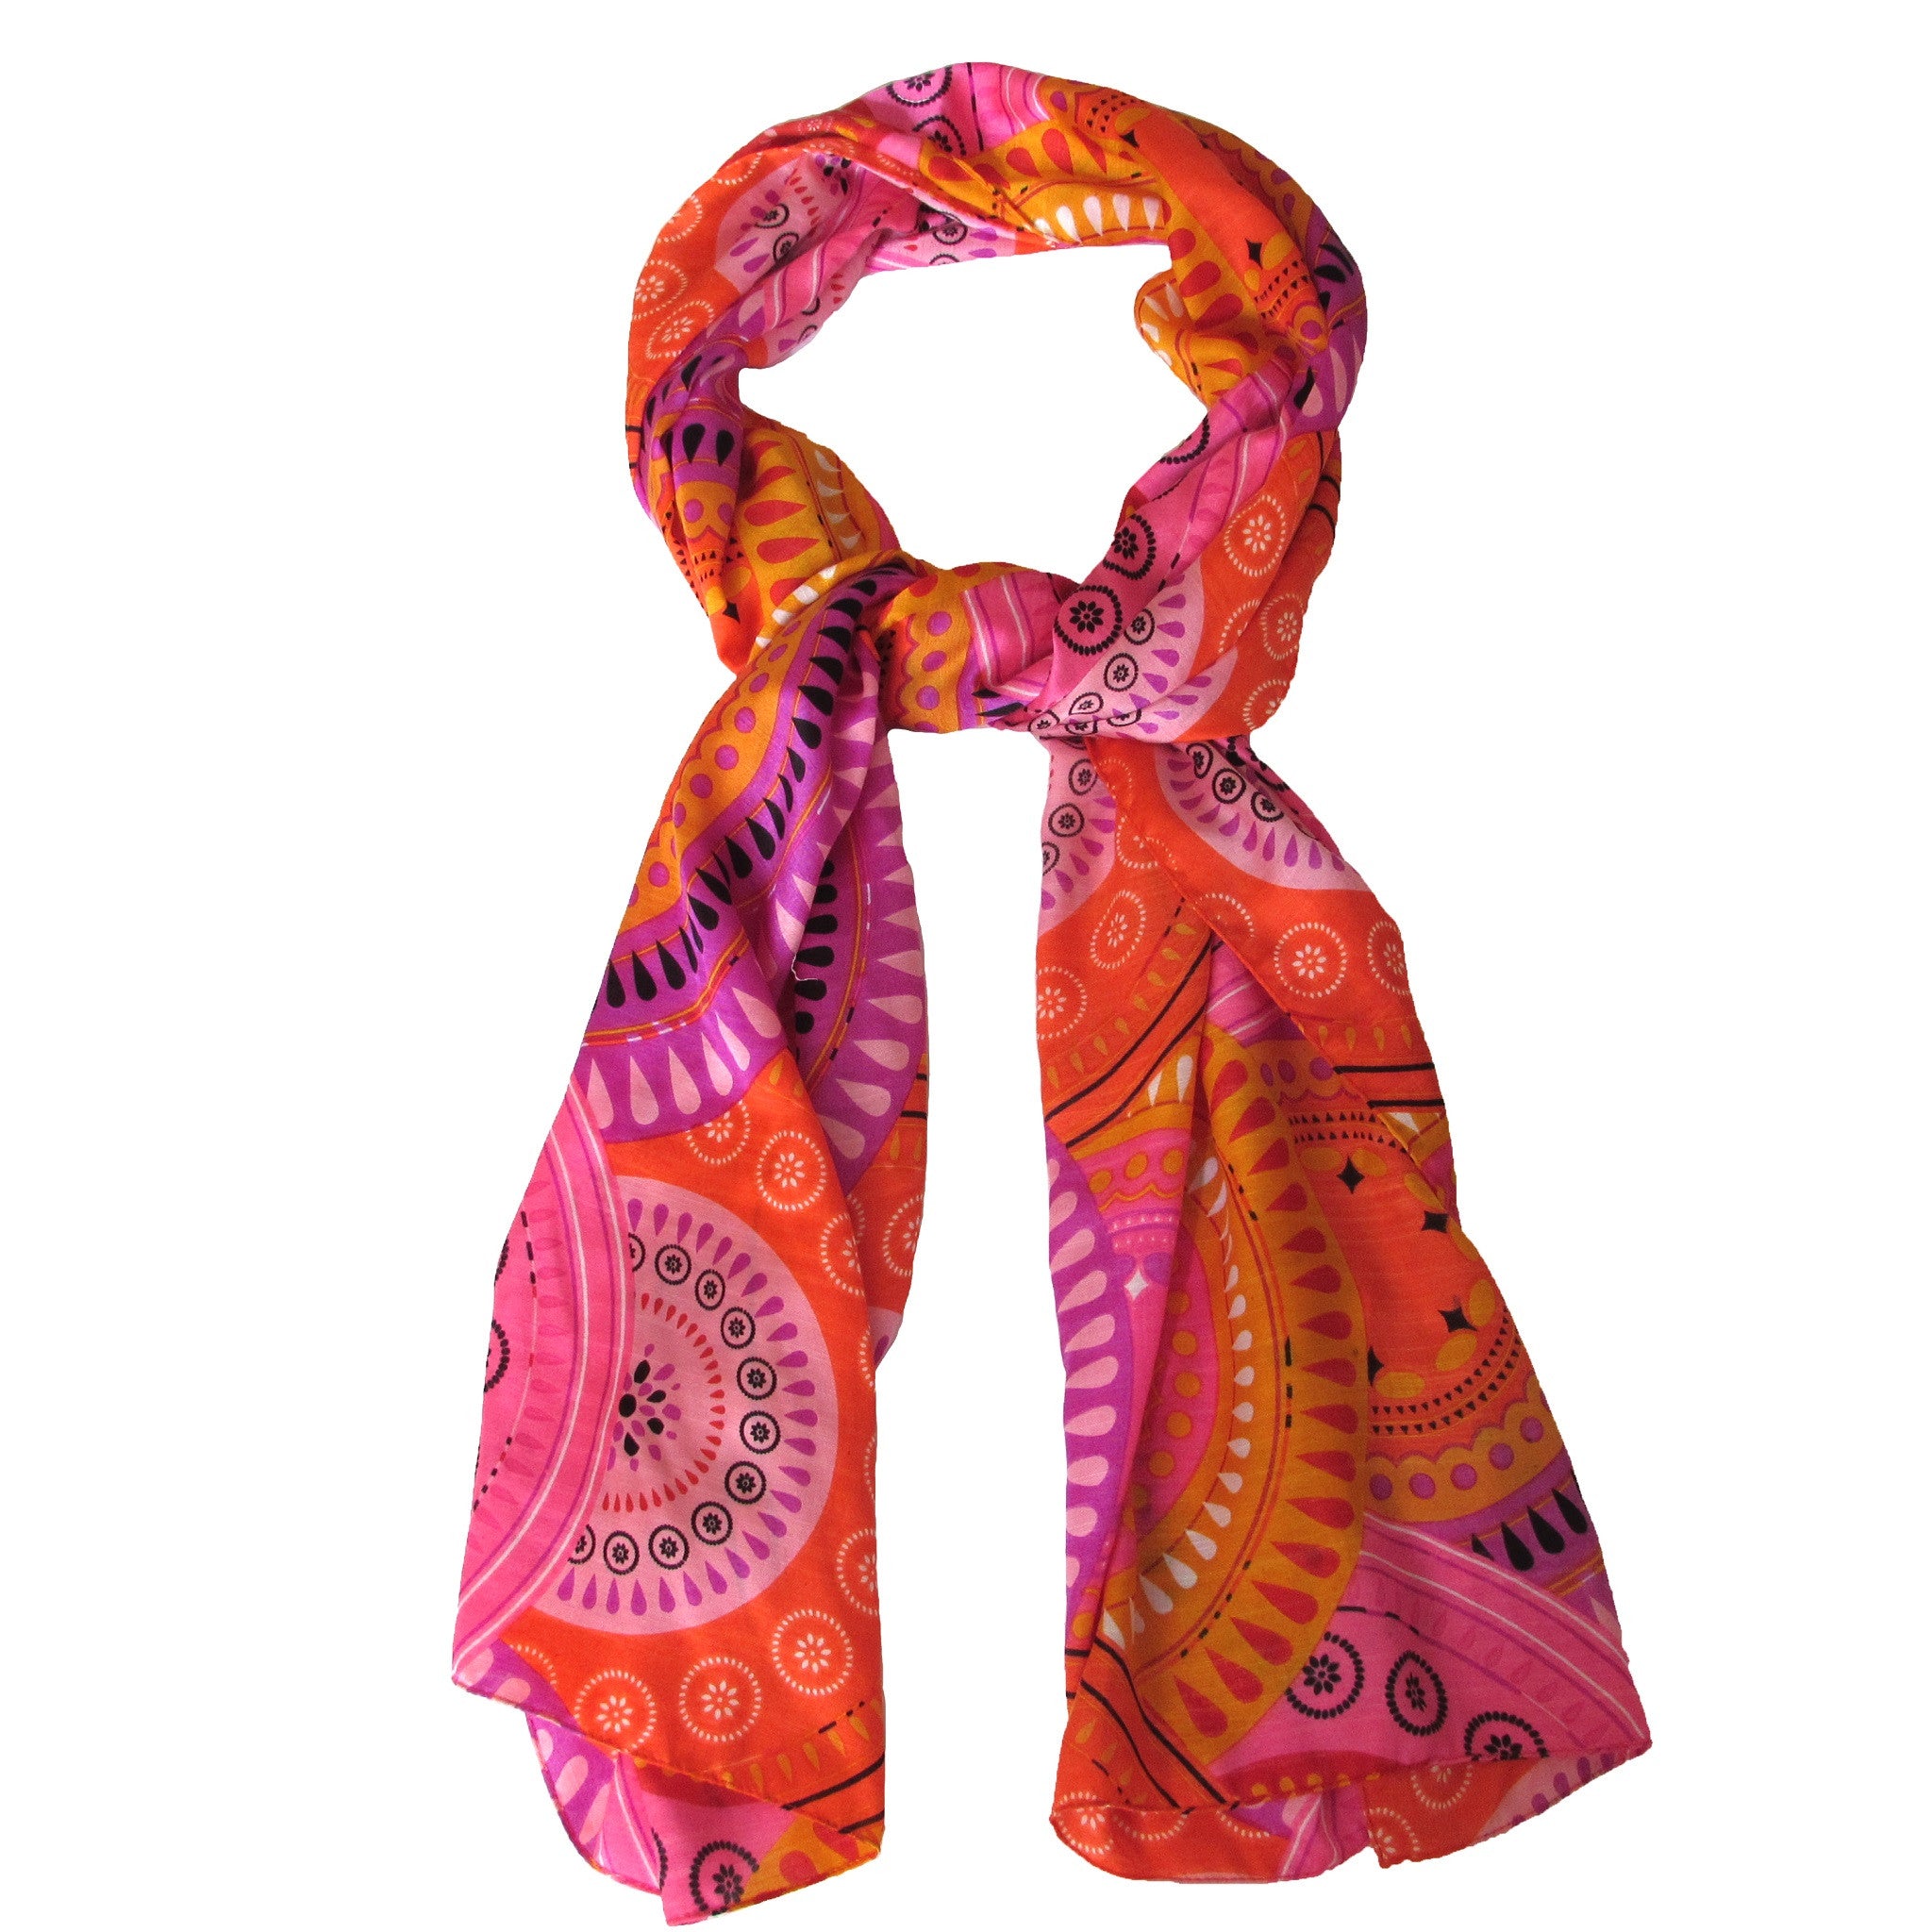 Echo Orange/Pink Printed Scarf Add a burst of color with this vibrant wrap by Echo